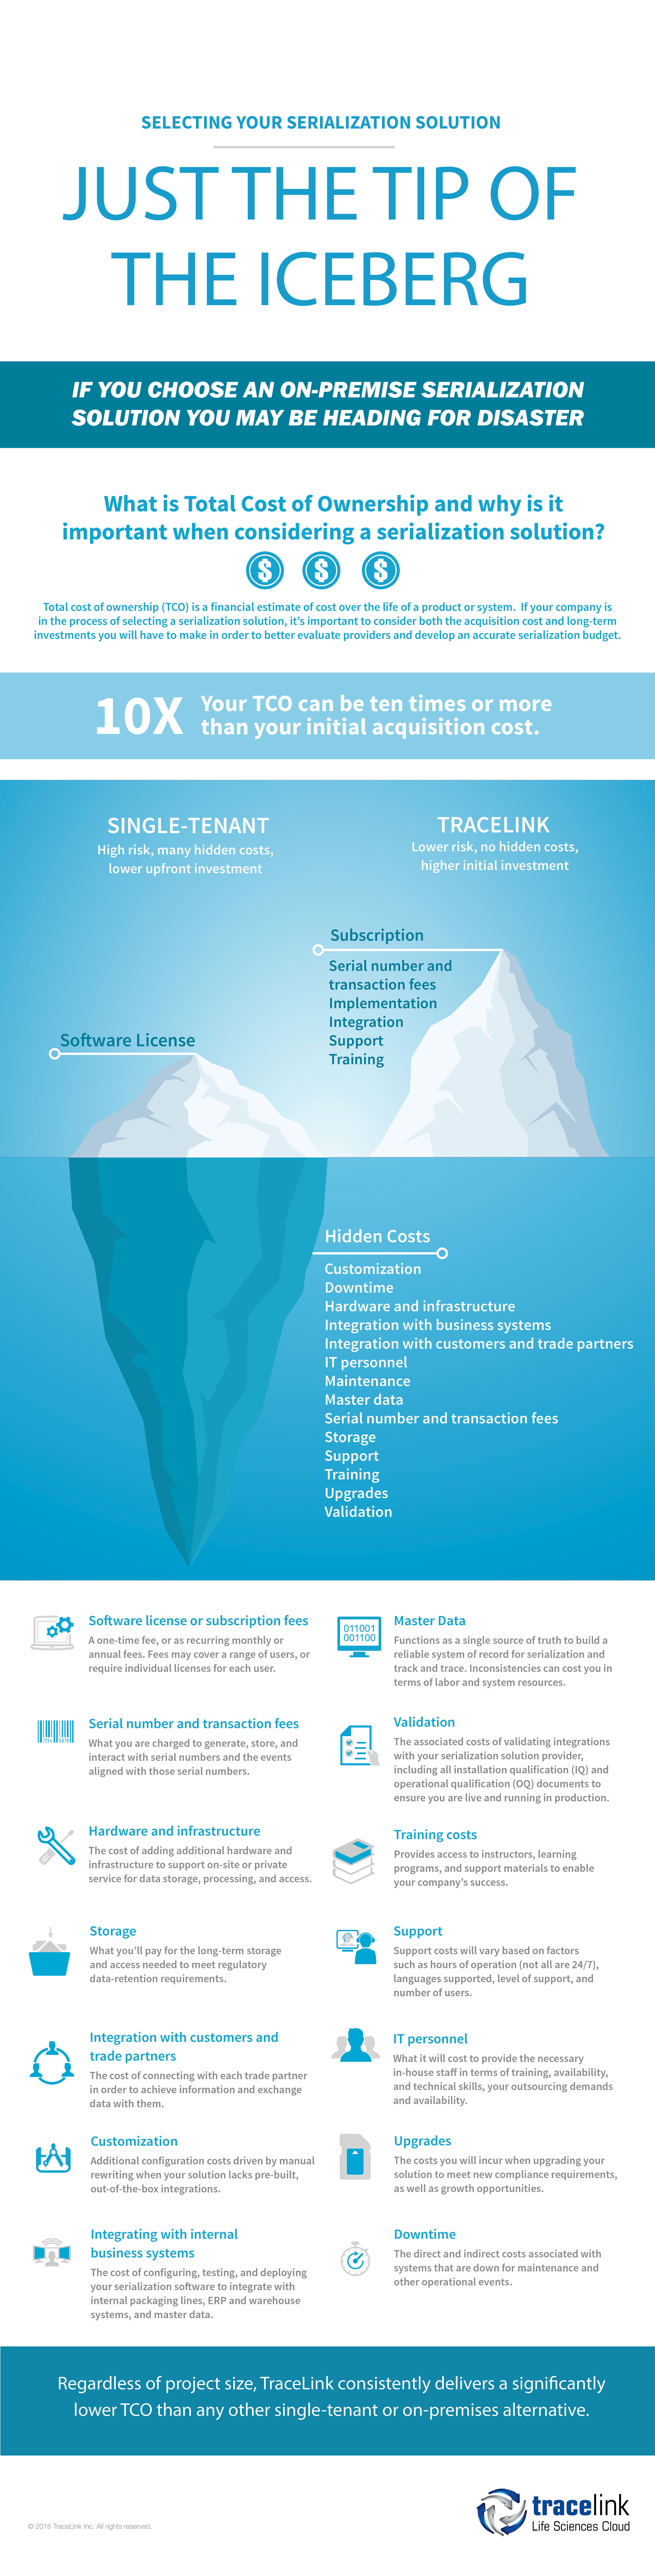 Just the Tip of the Iceberg Infographic